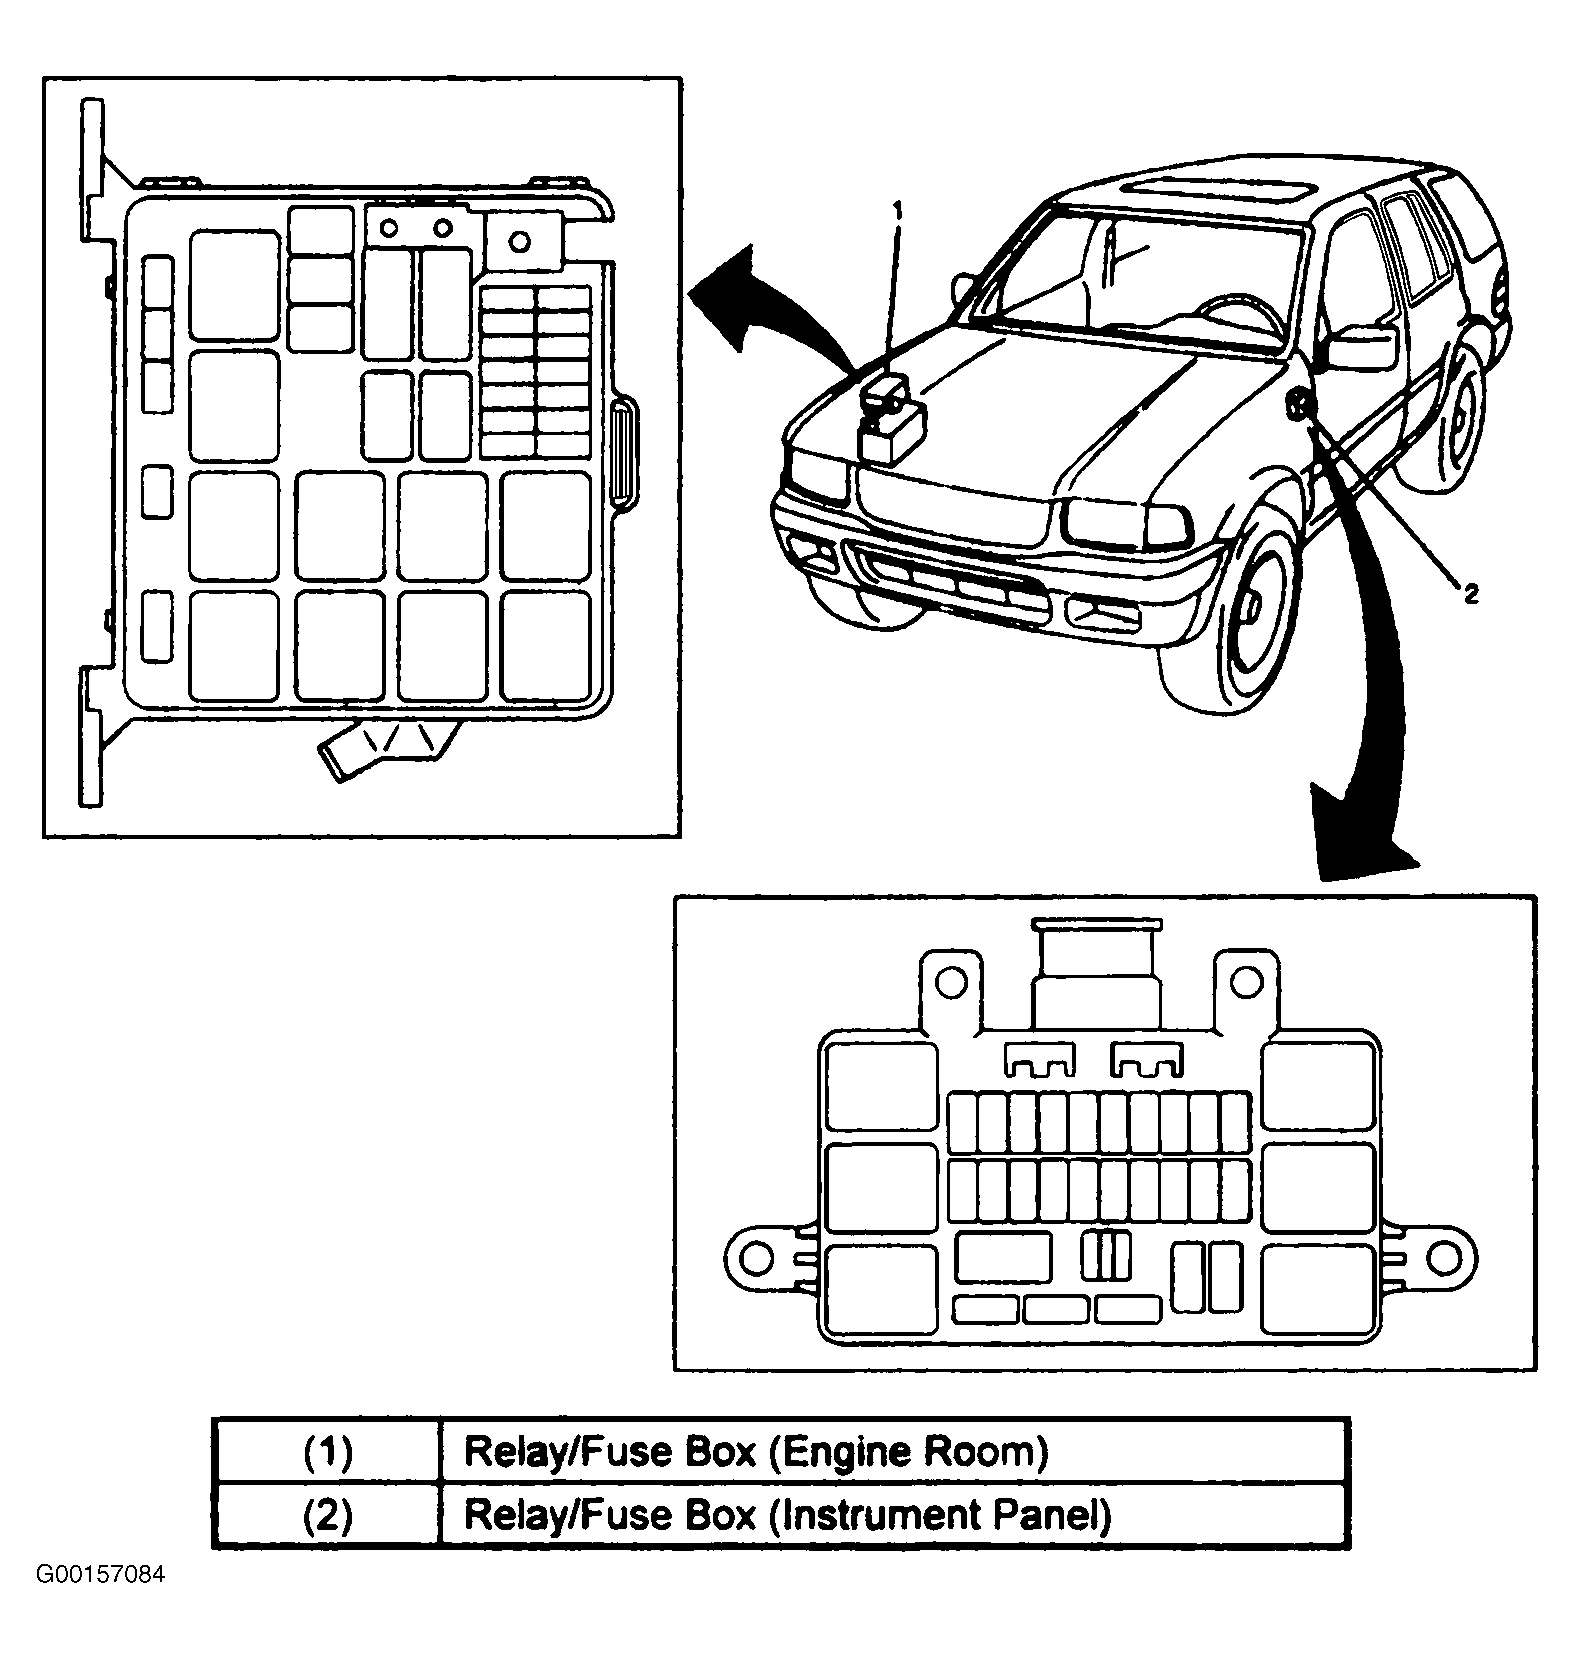 Isuzu Rodeo LS 2000 - Component Locations -  Locating Fuse Panel & Relay Boxes